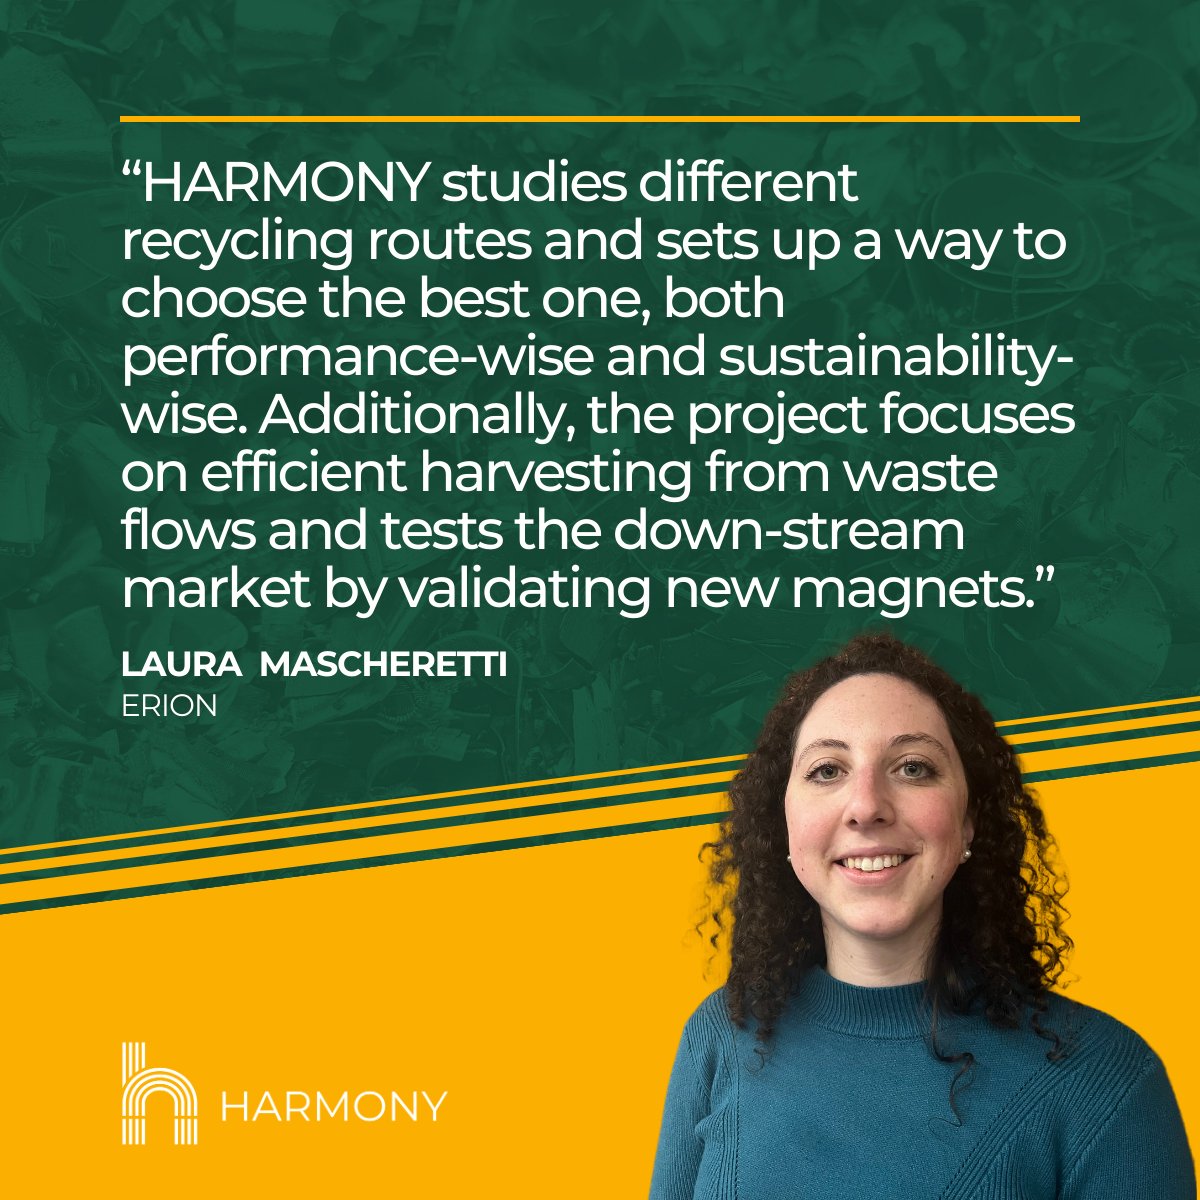 This week, we introduce Laura Mascheretti from @ErionSistema. In HARMONY ERION will conduct a value chain analysis of NdFeB magnets collaborate closely with @polimi to scale up their magnet disassembly pilot plant. #rareearths  #PermanentMagnets #REEs